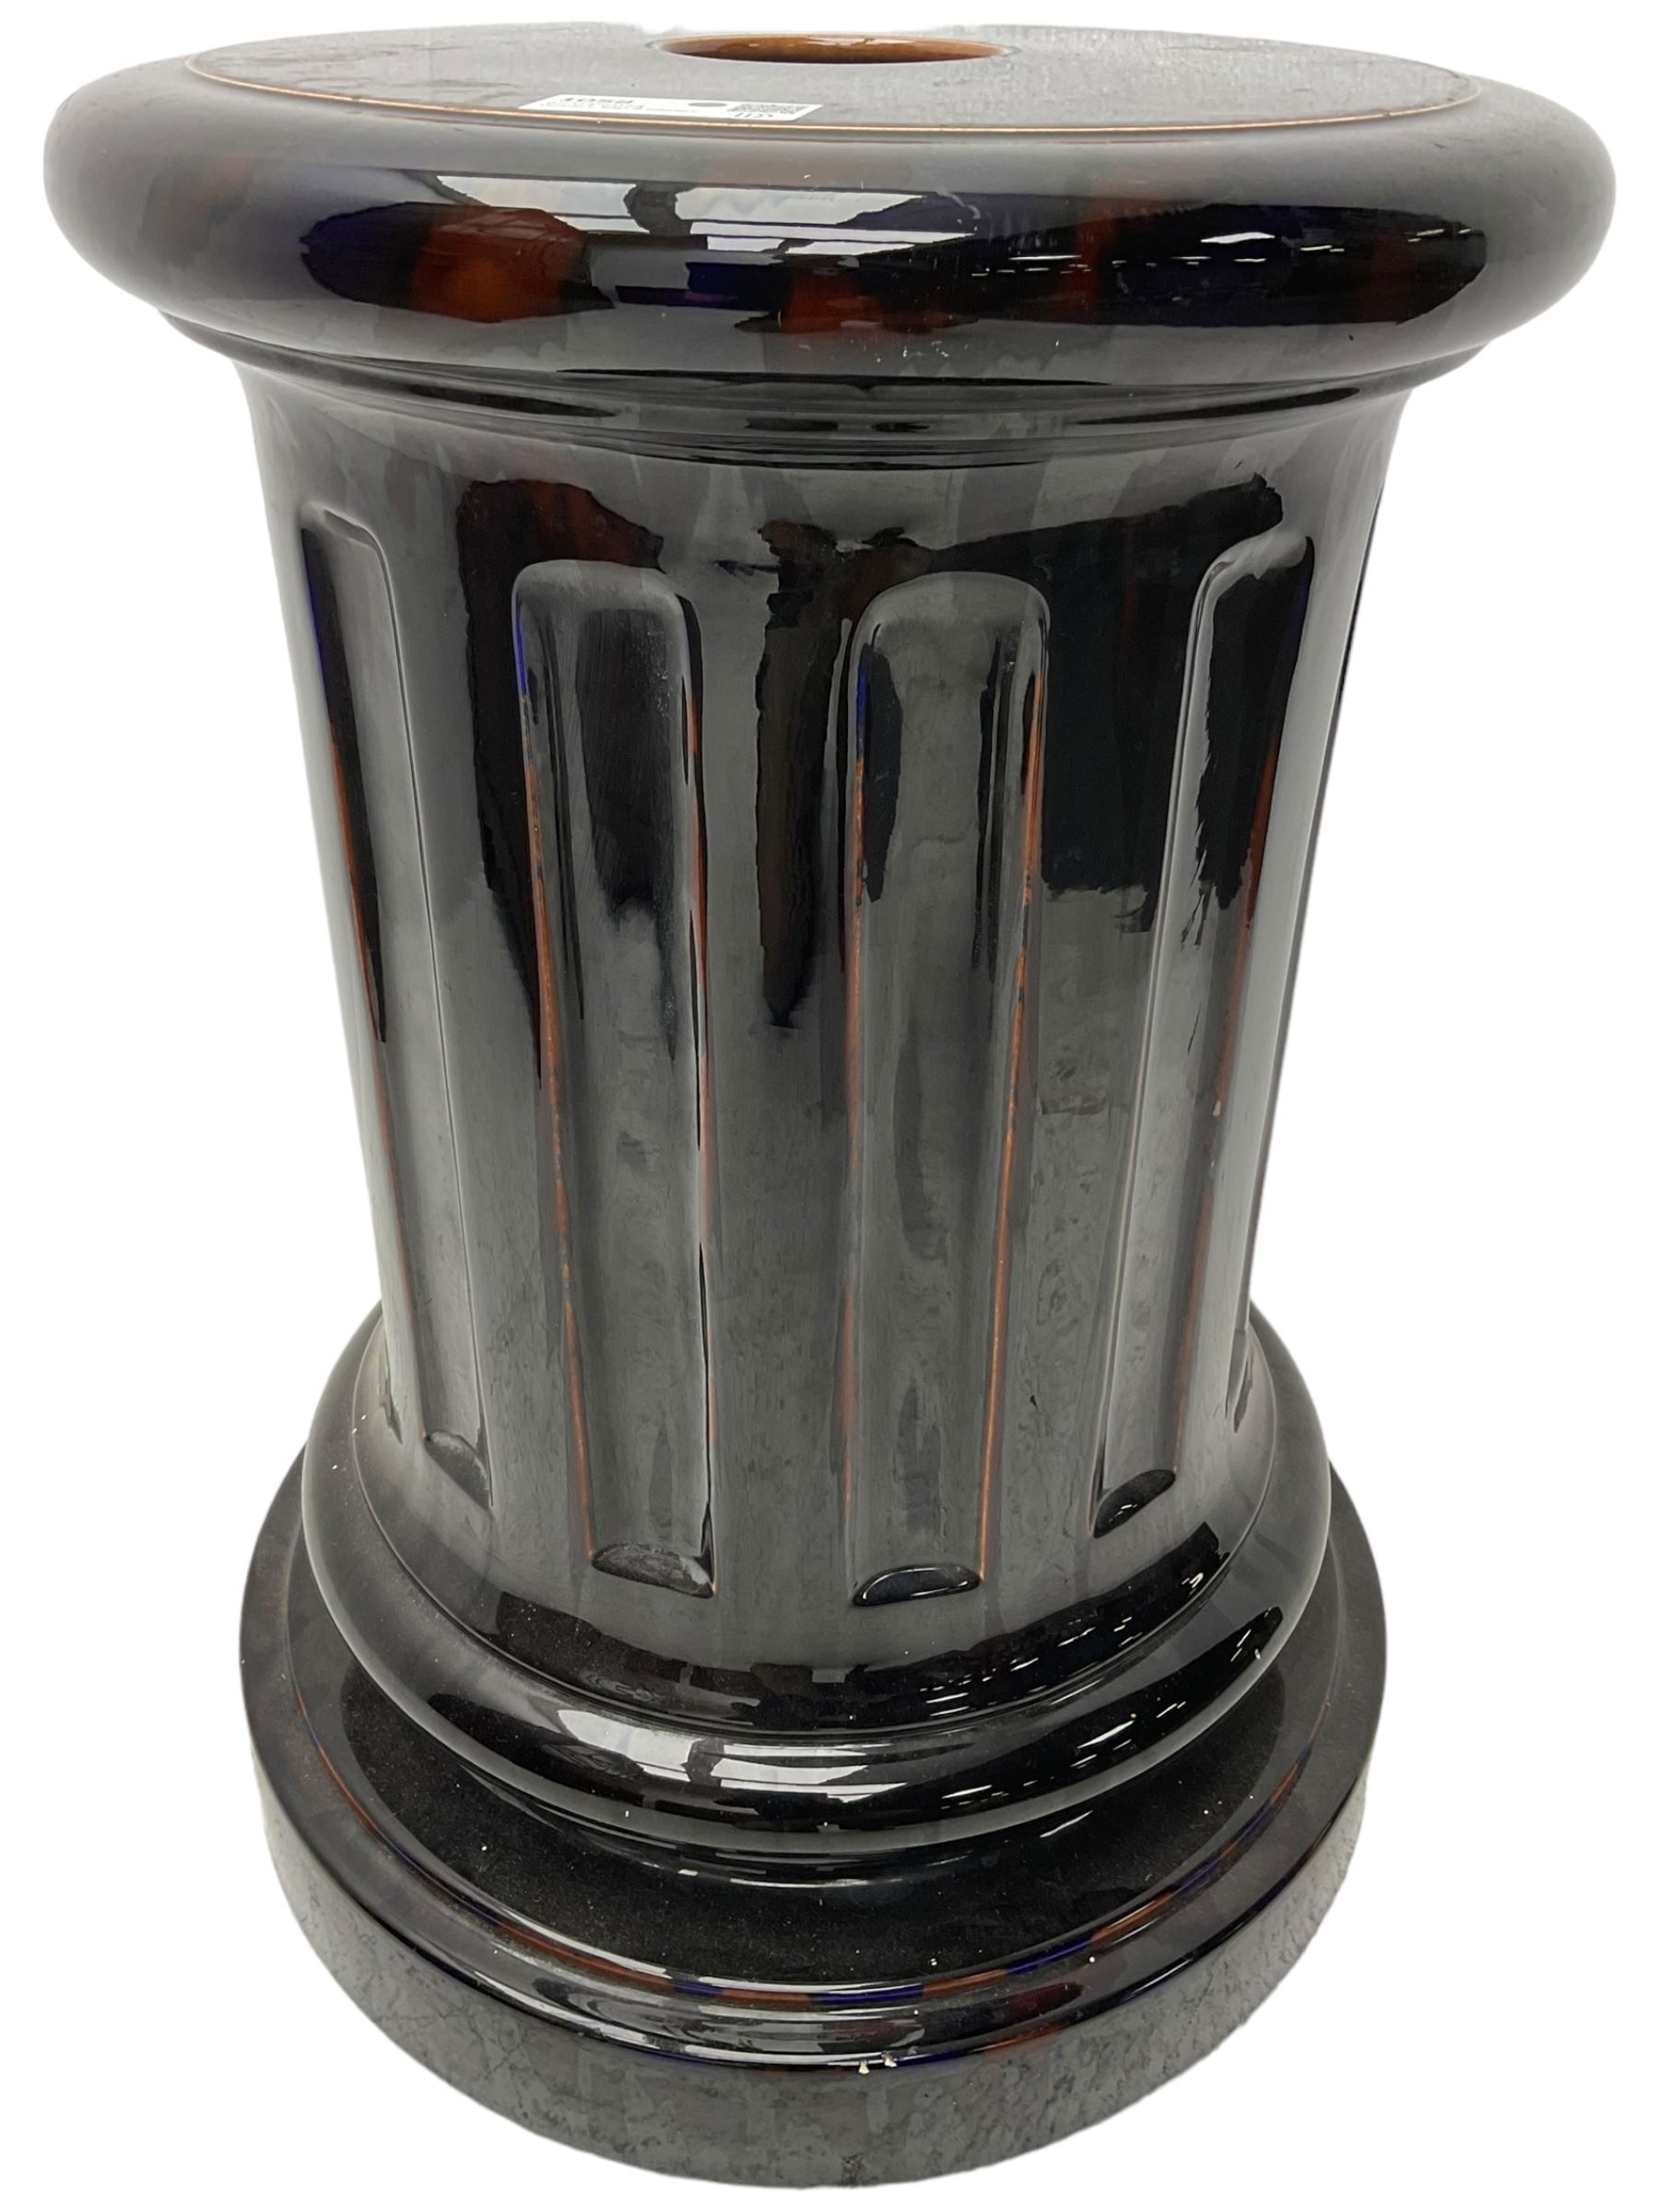 Late 19th to early 20th century Sarreguemines red and blue glazed pedestal stand